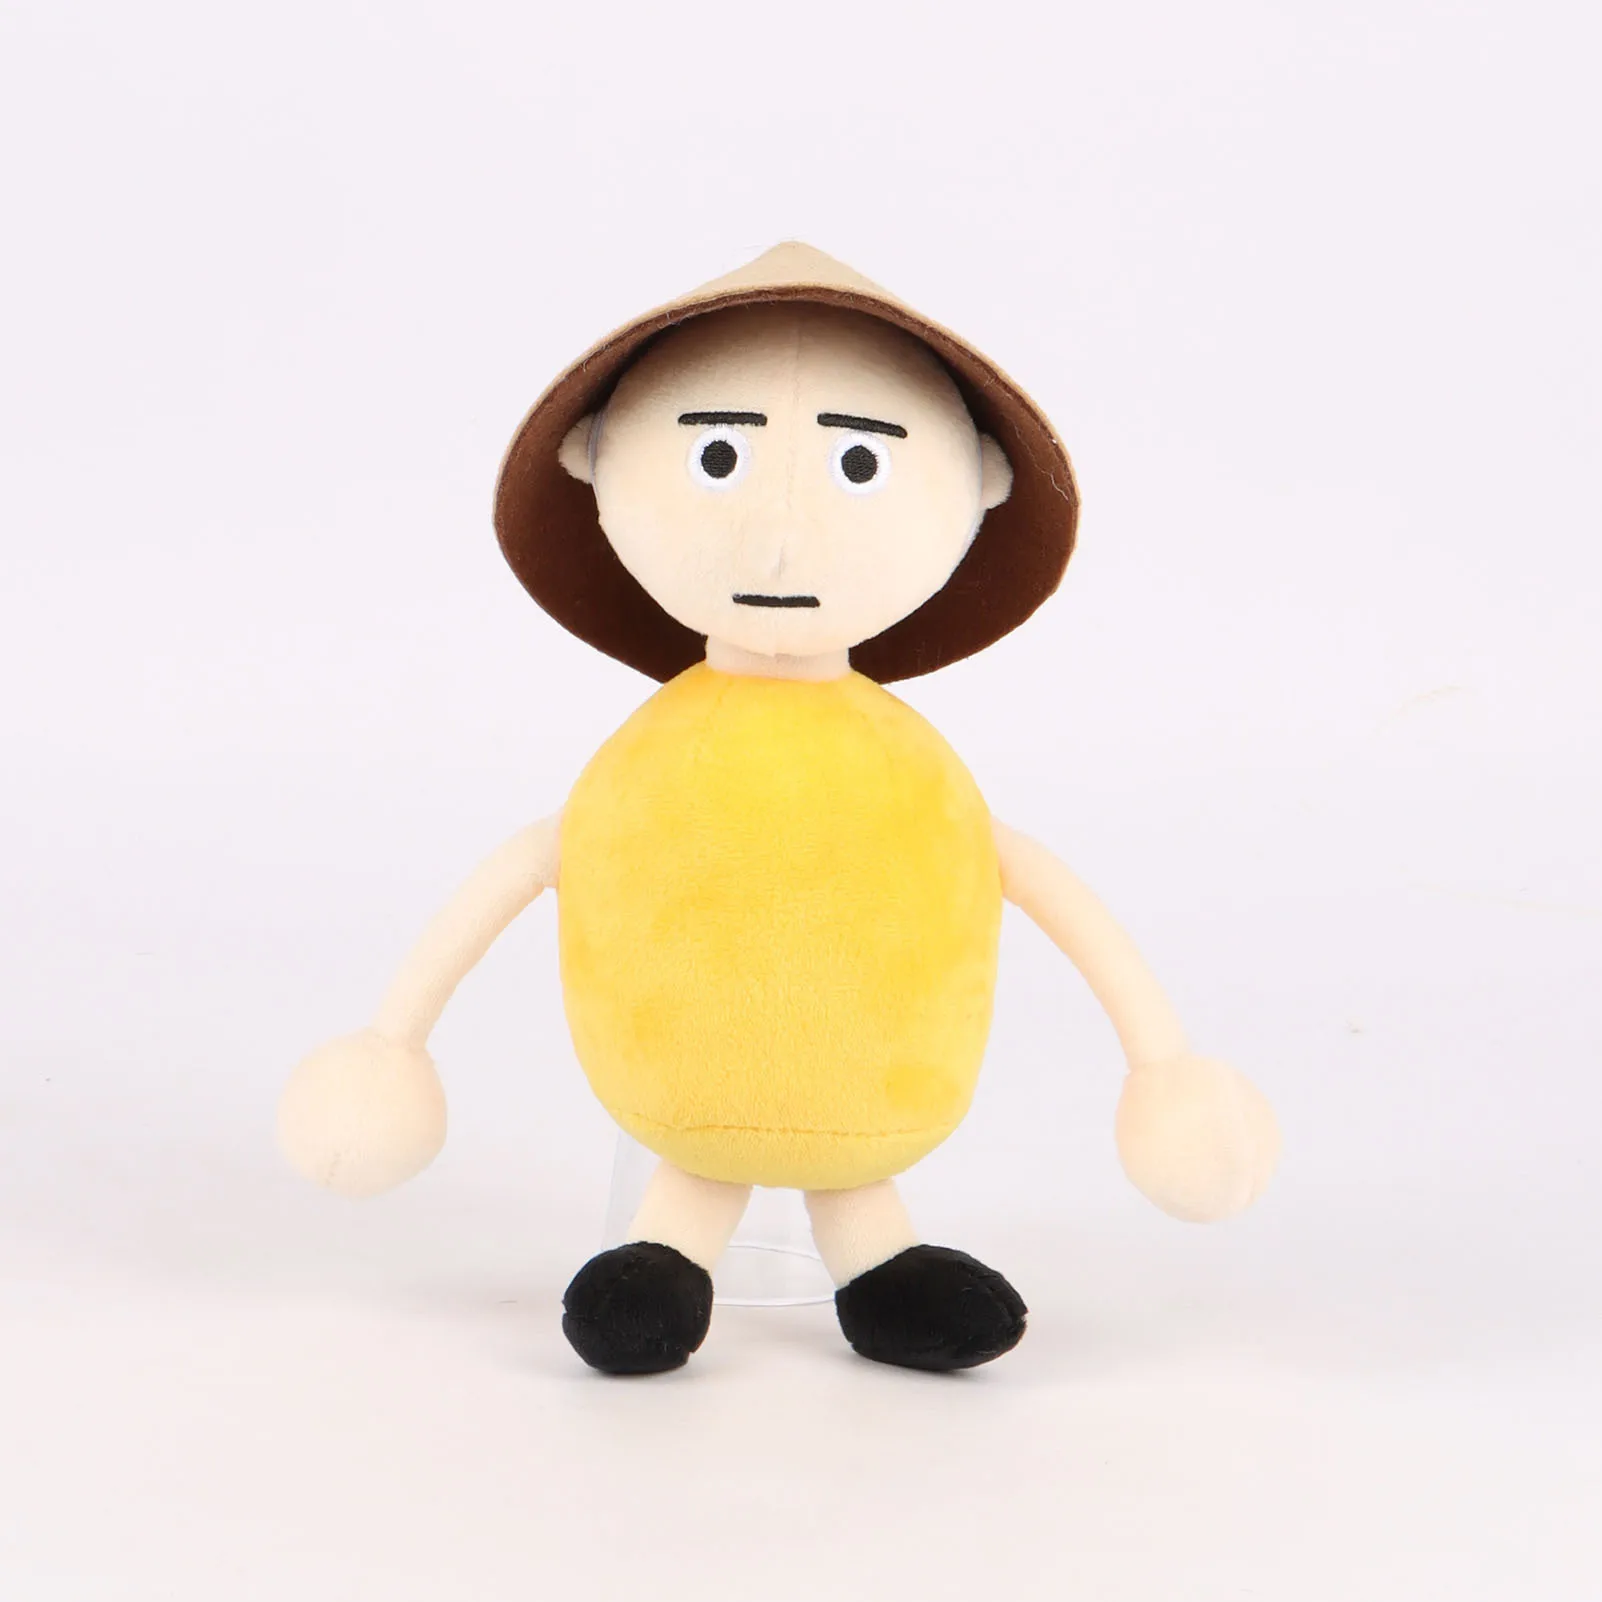 23cm Multiplayer Platform Golf Plush Toys Lifelike Plushies Hot Game Figures Best Collections For Fans Home Decor Festival Gifts bob marley collections 1 cd